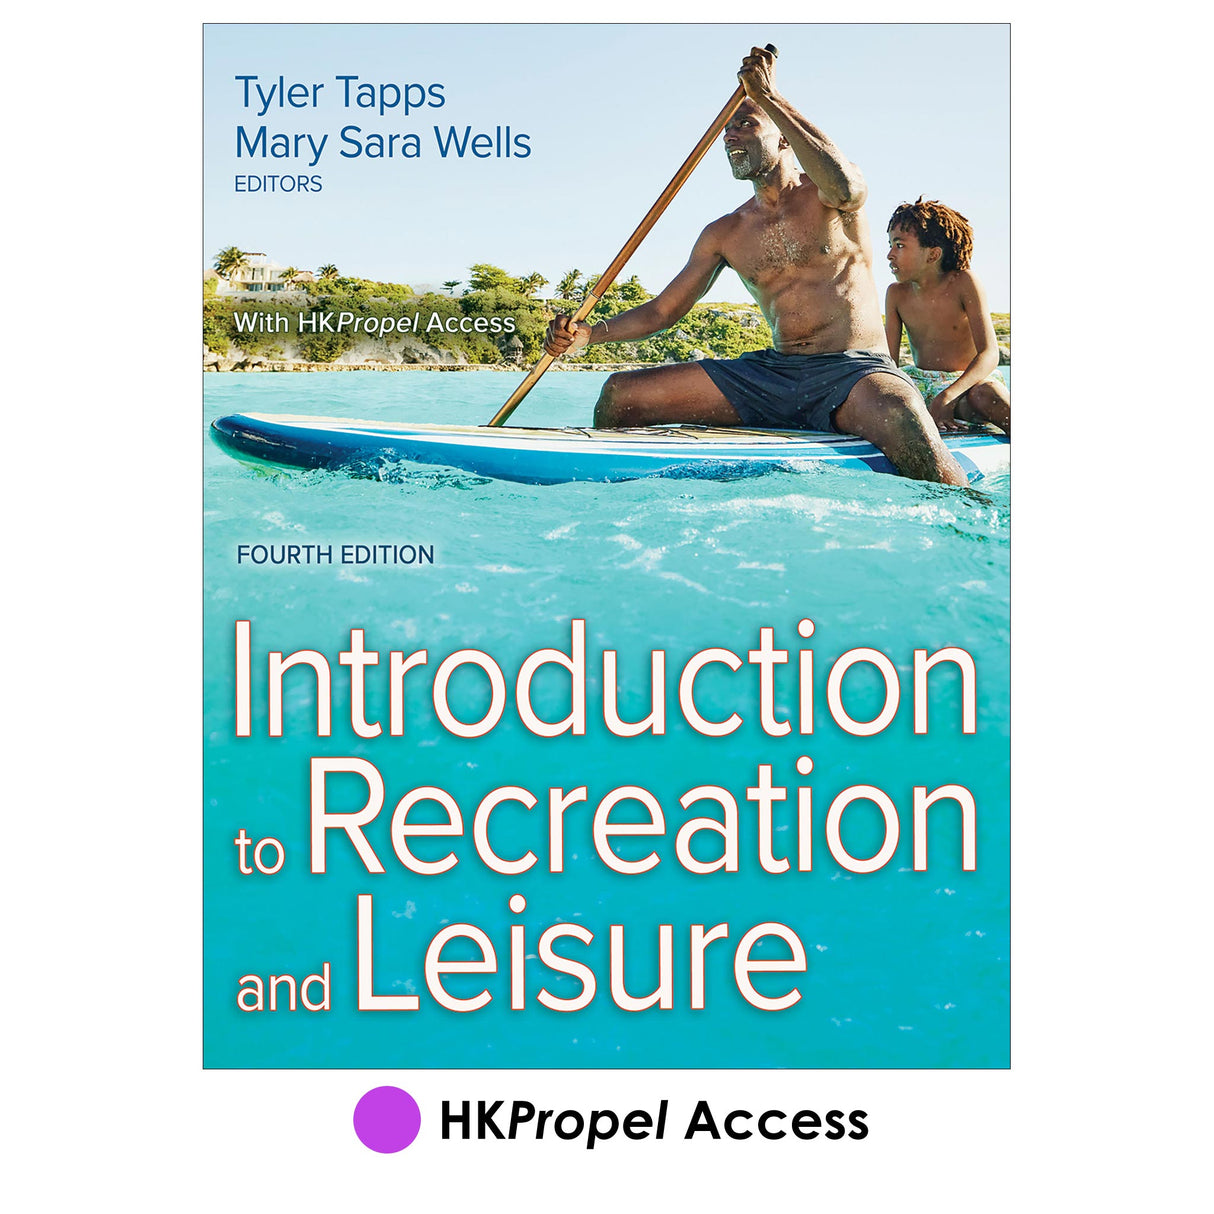 Introduction to Recreation and Leisure 4th Edition HKPropel Access